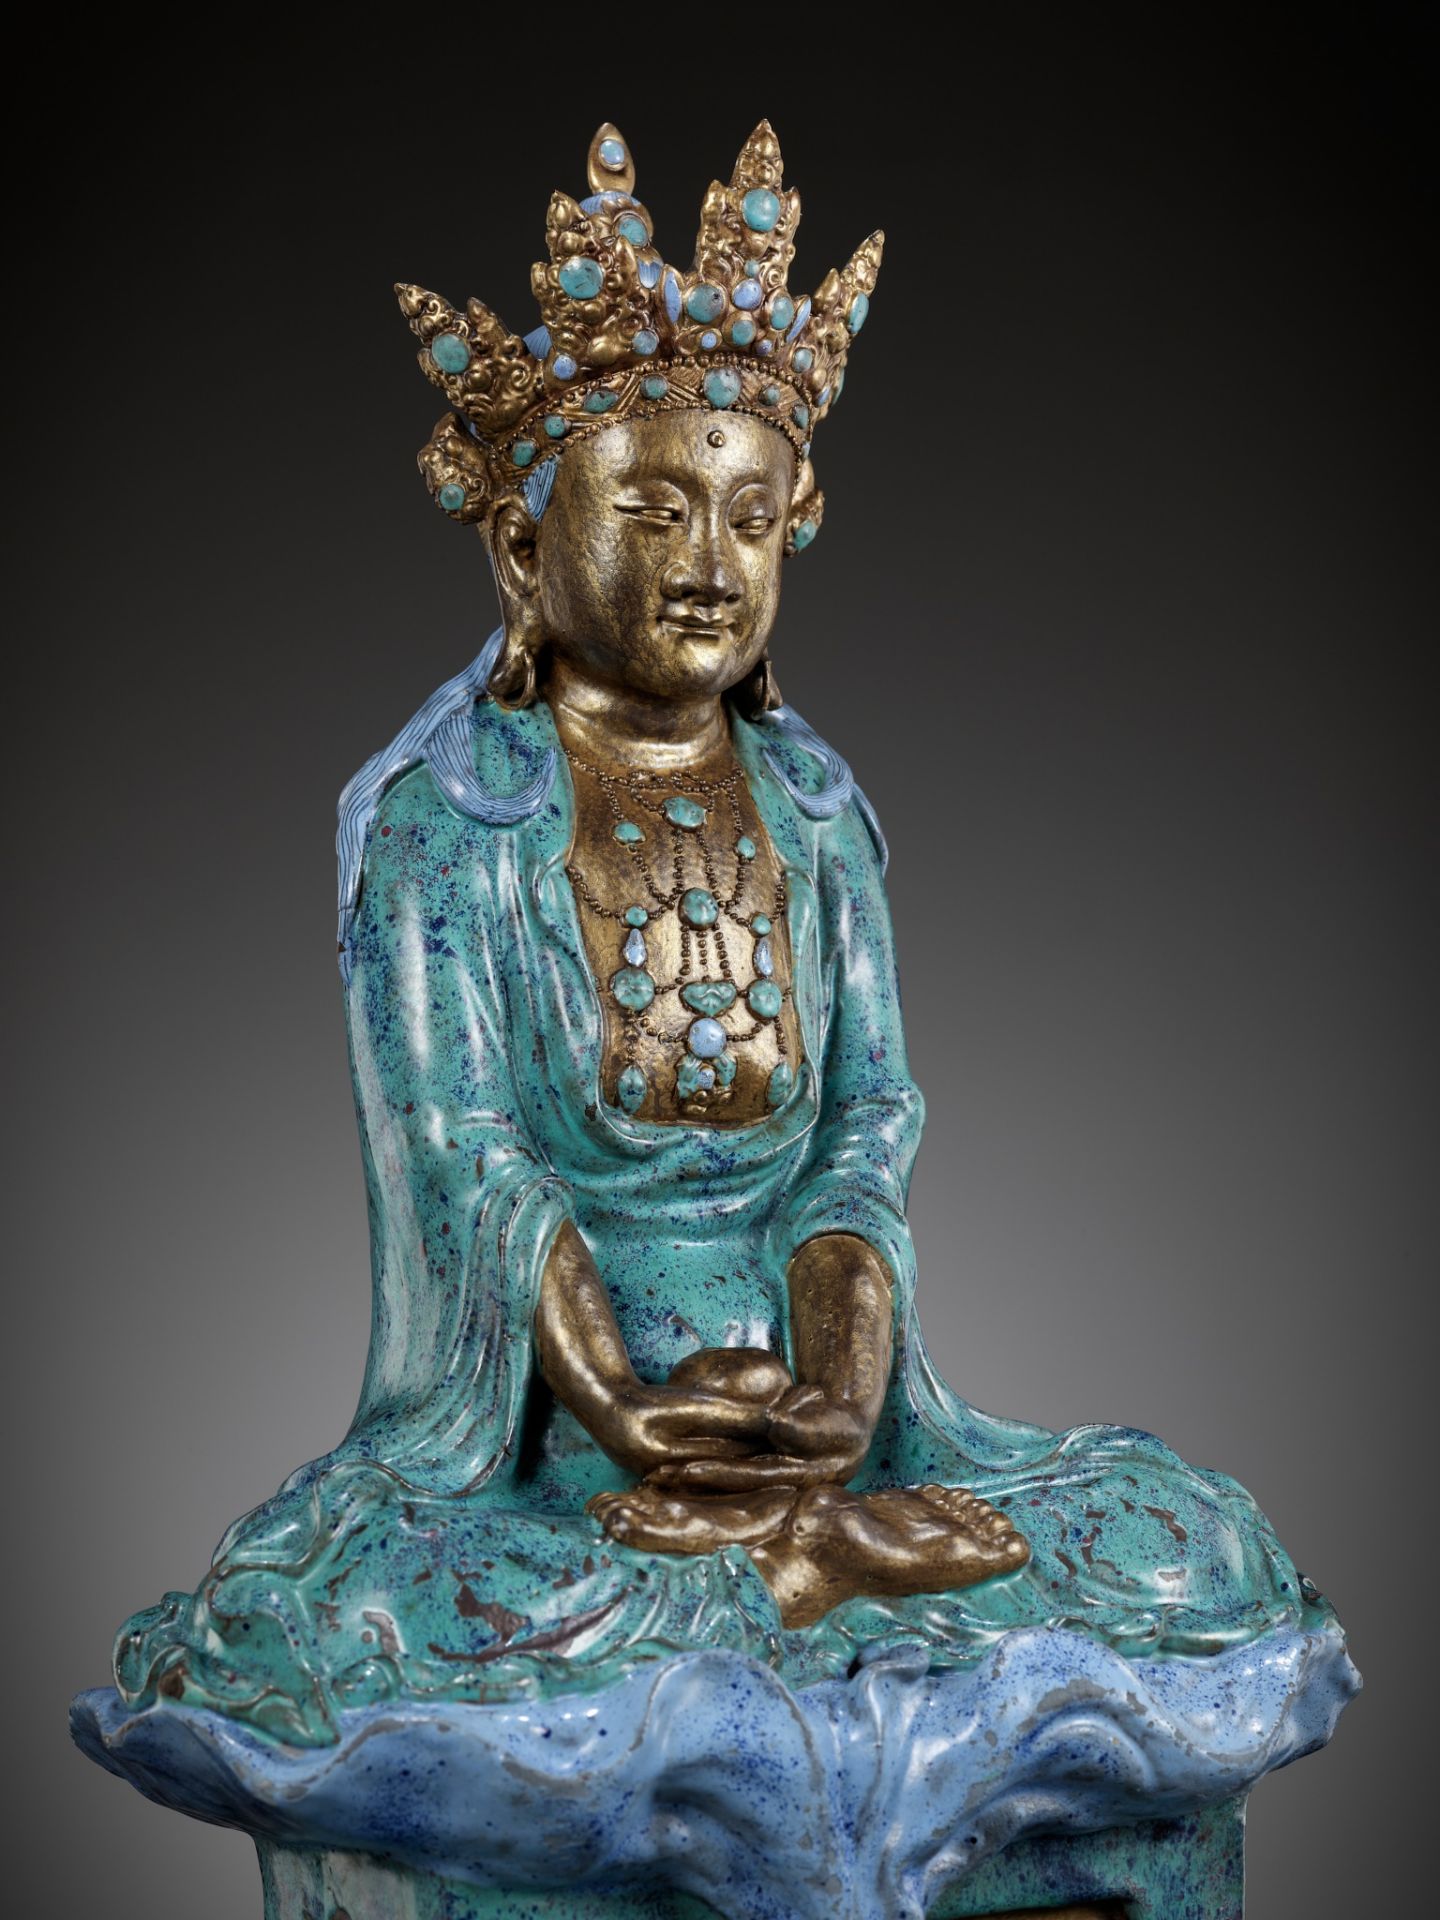 A VERY LARGE ‘ROBIN’S EGG’ ENAMELED AND GILT PORCELAIN FIGURE OF AMITAYUS,QIANLONG TO JIAQING PERIOD